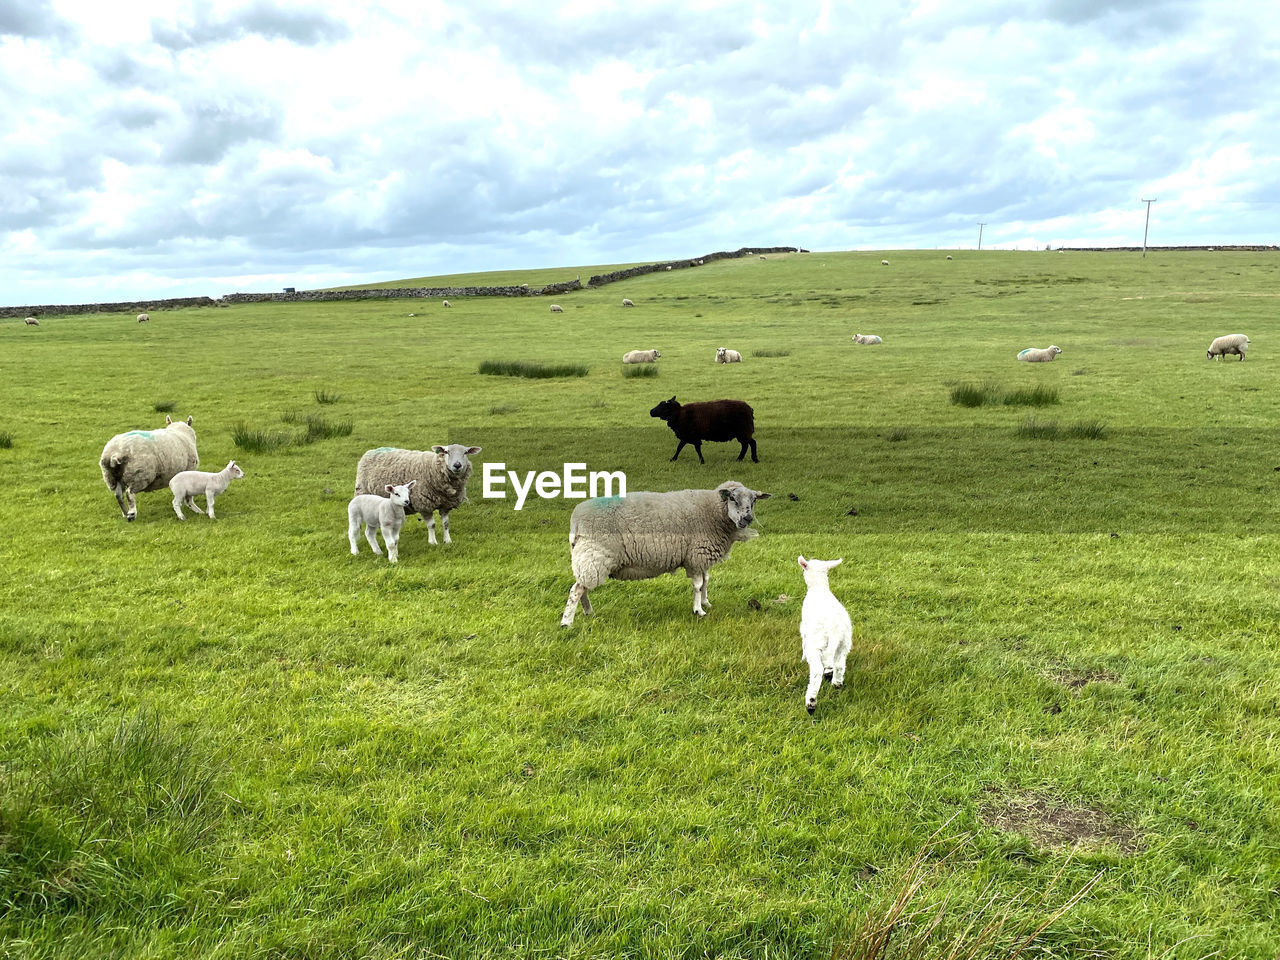 Sheep, grazing in a large pasture, with a dry stone wall, and a cloudy sky near, haworth,  uk